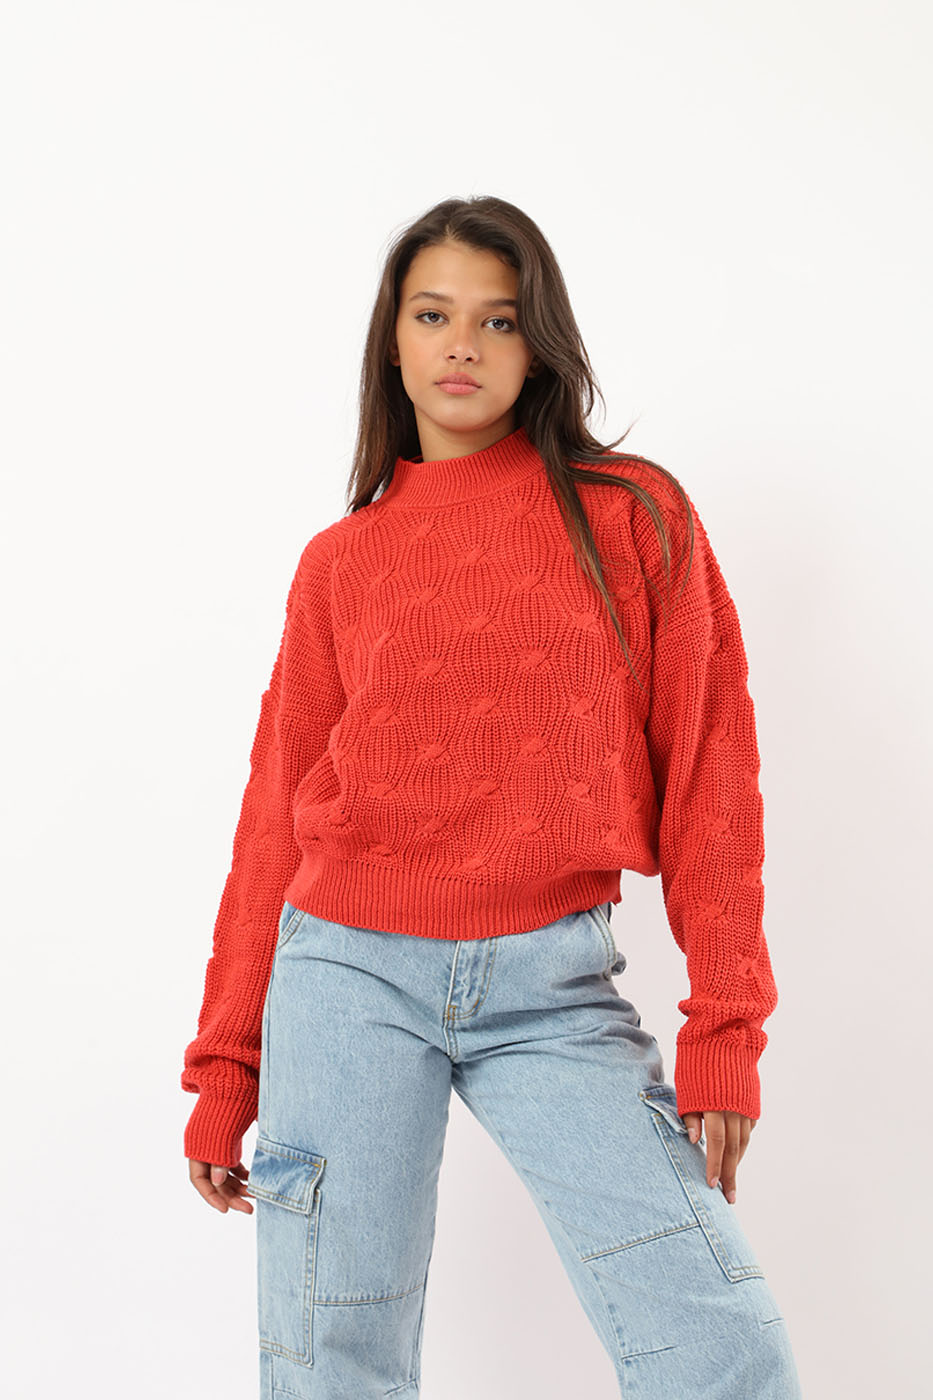 Crewneck Sweater In Red – FYI thumbnail